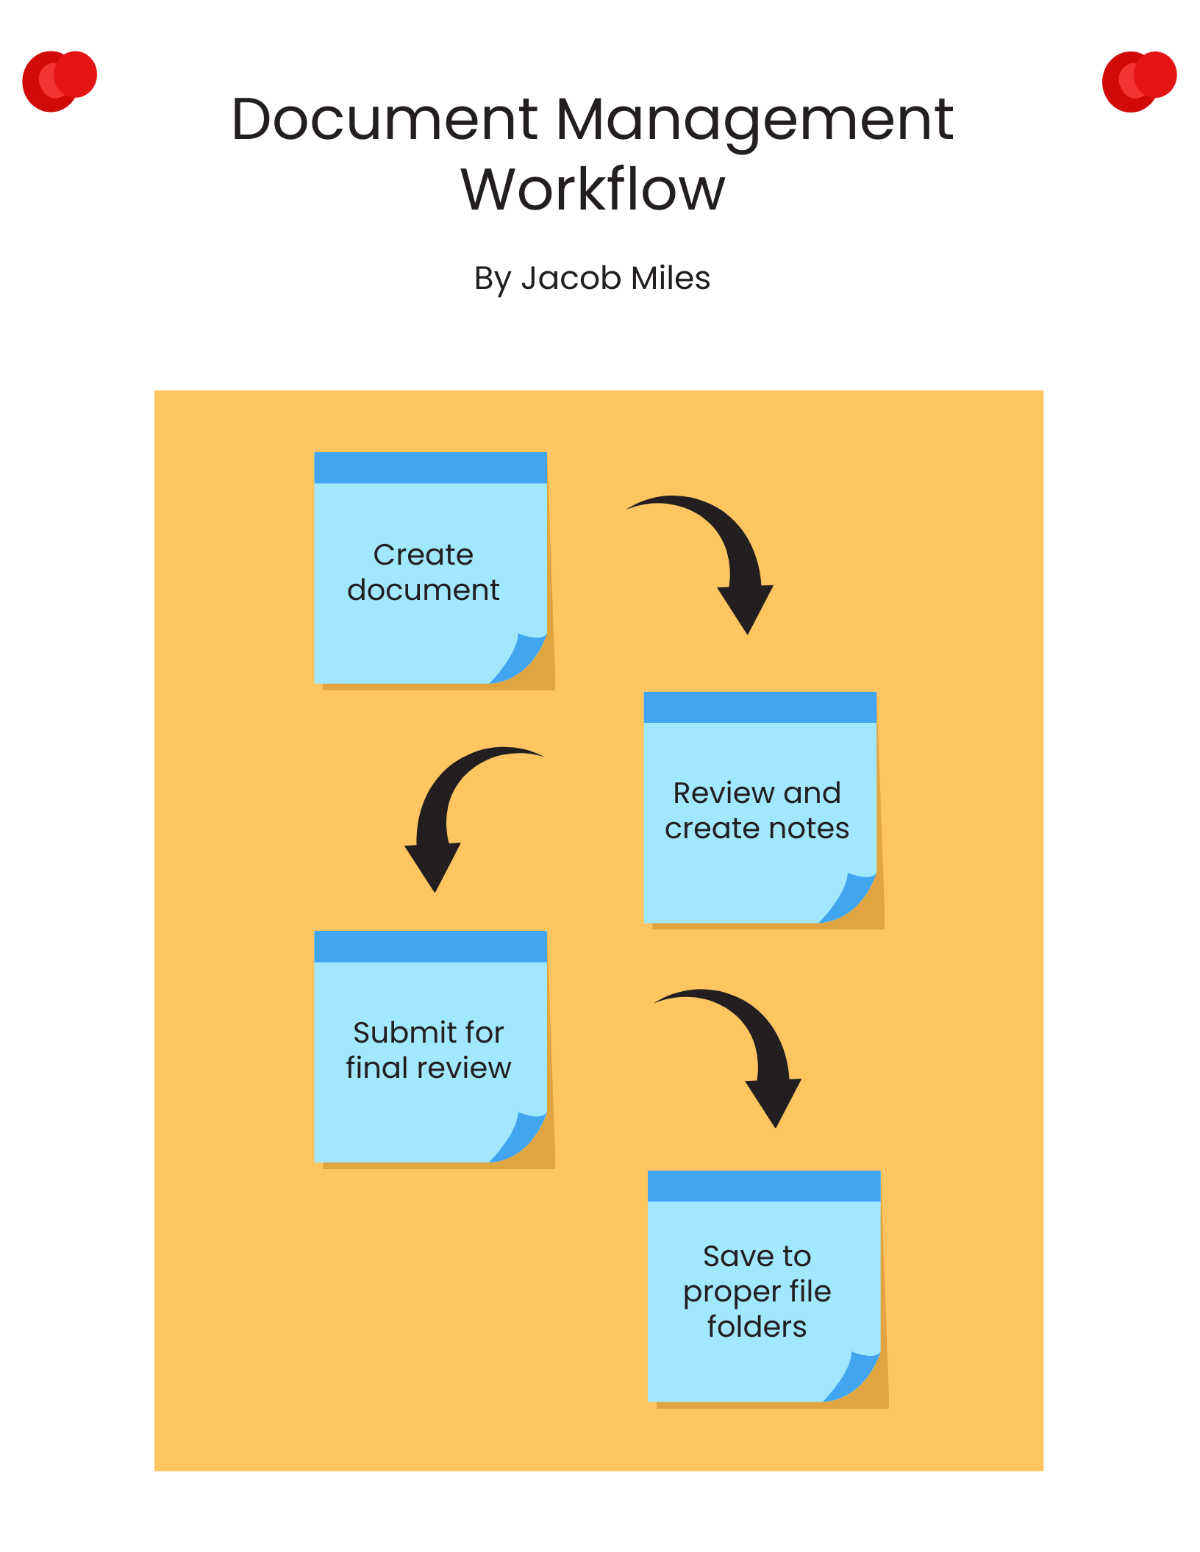 Document Management Workflow Template